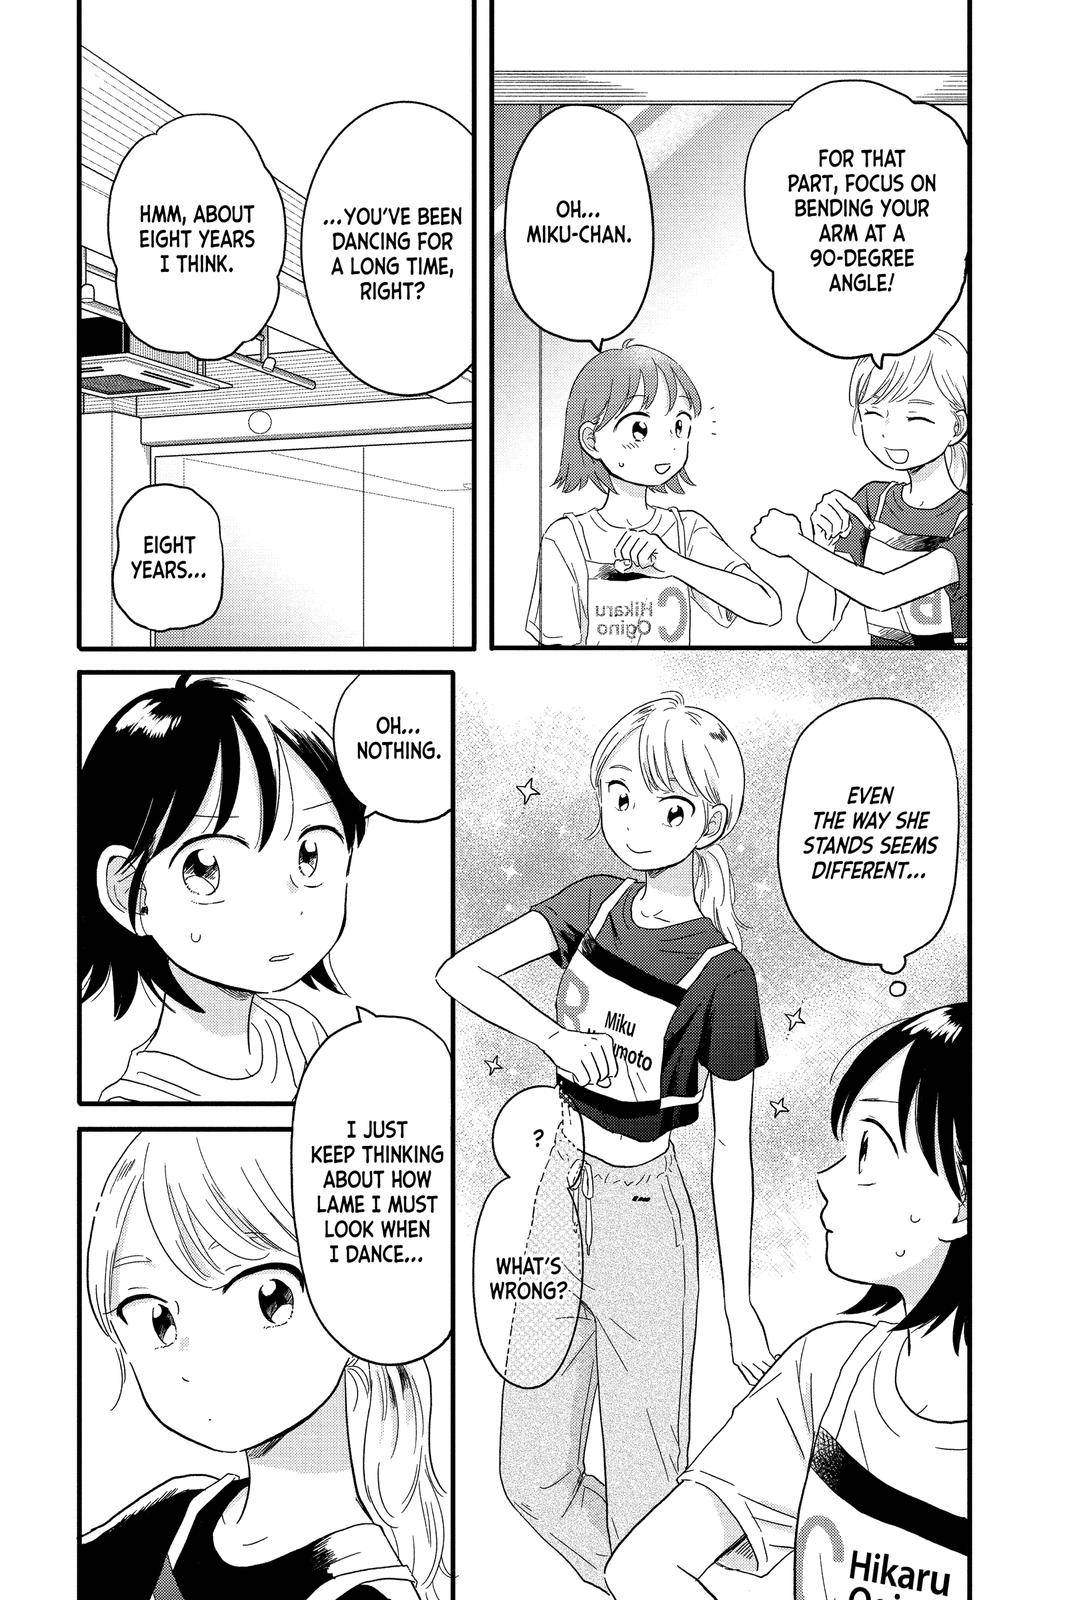 Hikaru In The Light! - chapter 12 - #5